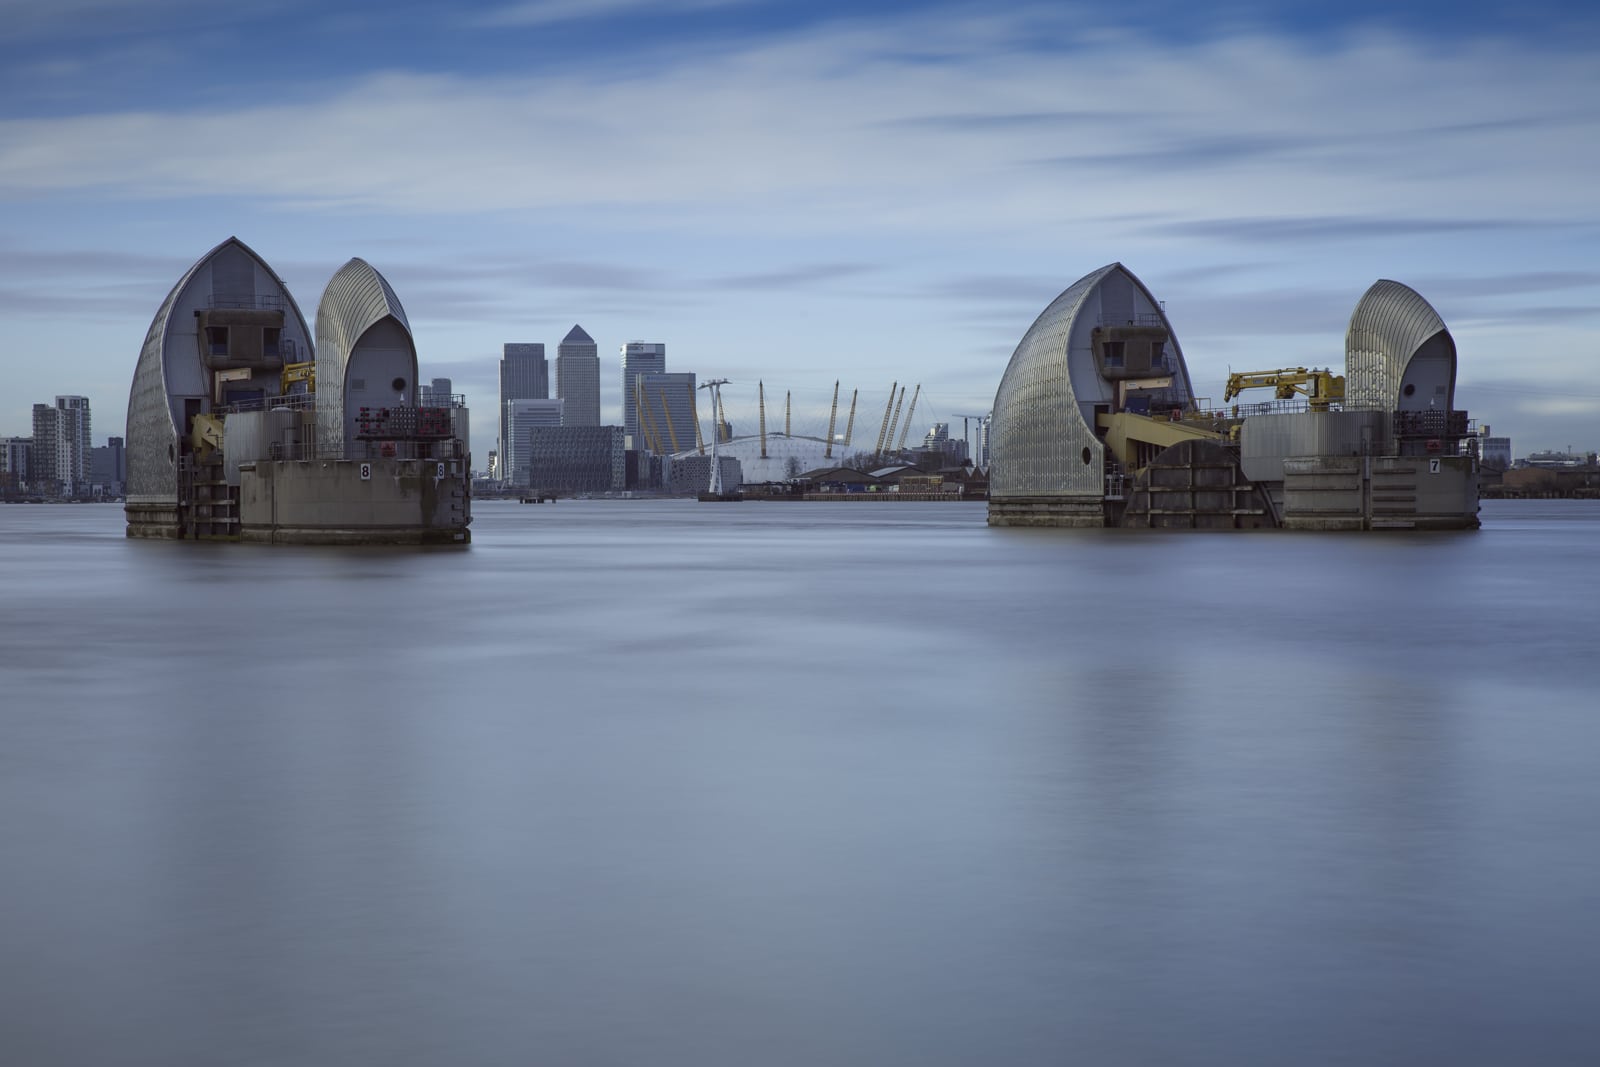 rich clark, thames barrier, abstract, rich clark images, landscape photography